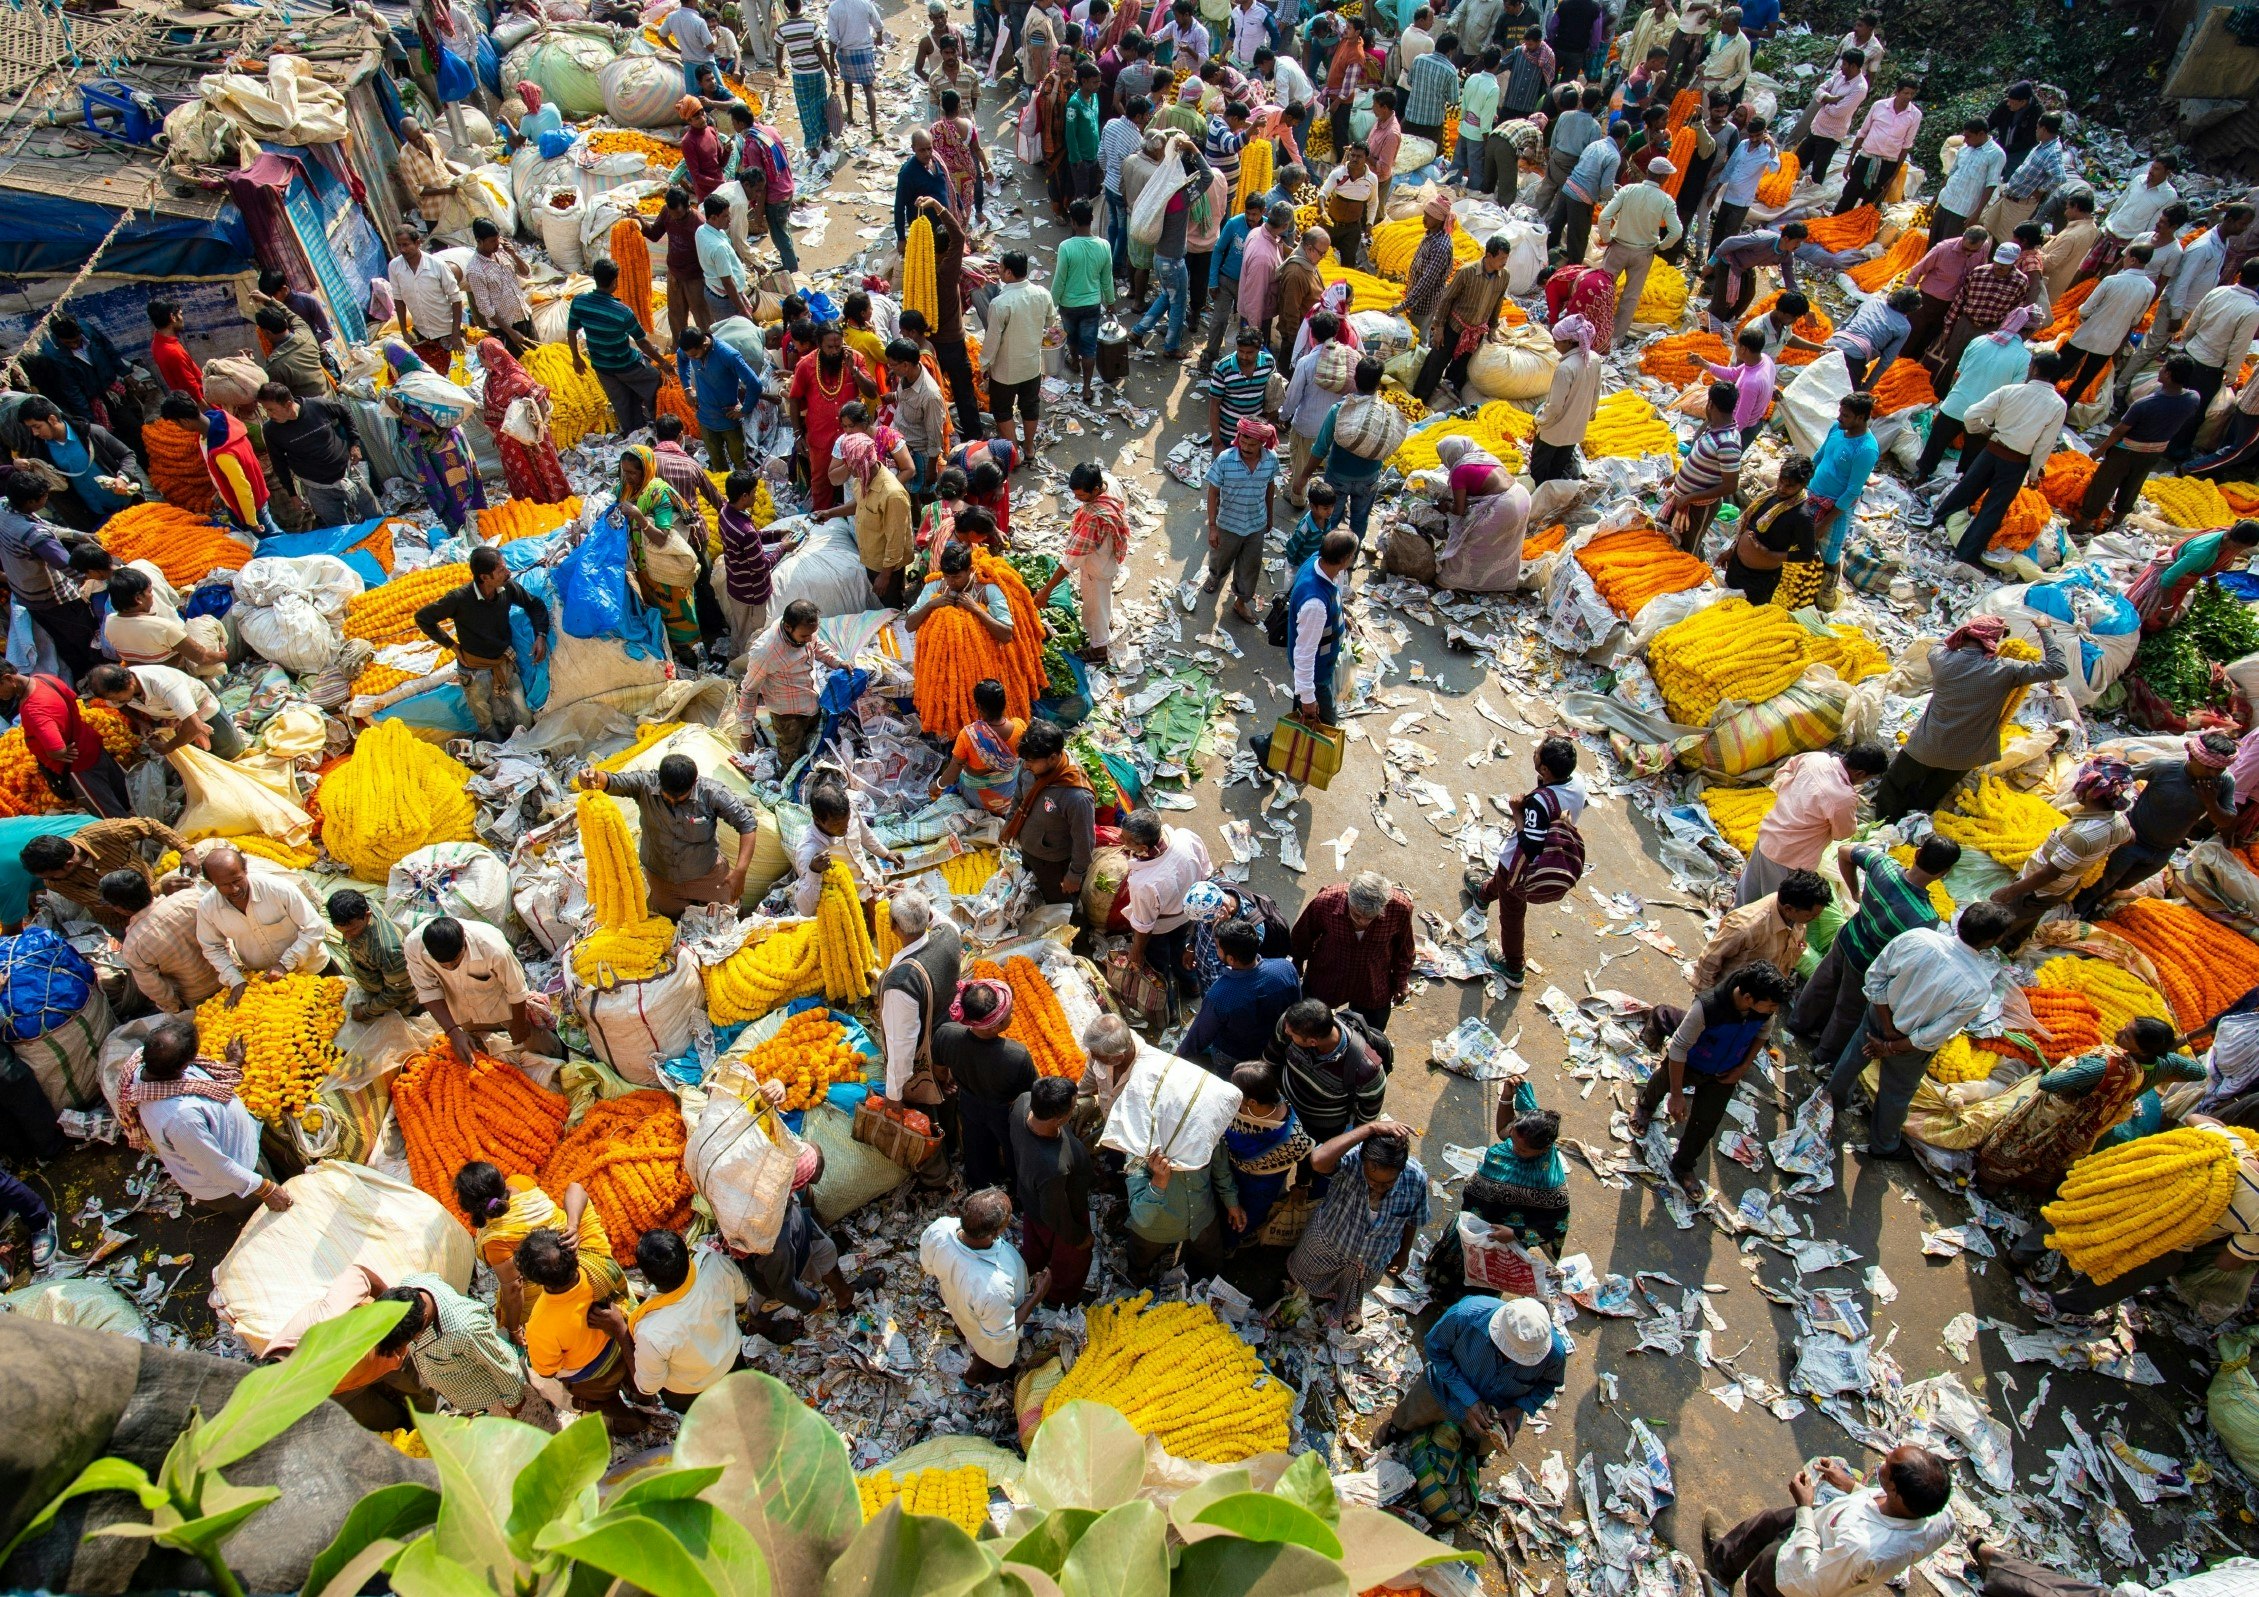 An elevated view of Mullik Ghat Flower Market in Kolkata; hundreds of vendors and buyers fill the colourful scene.